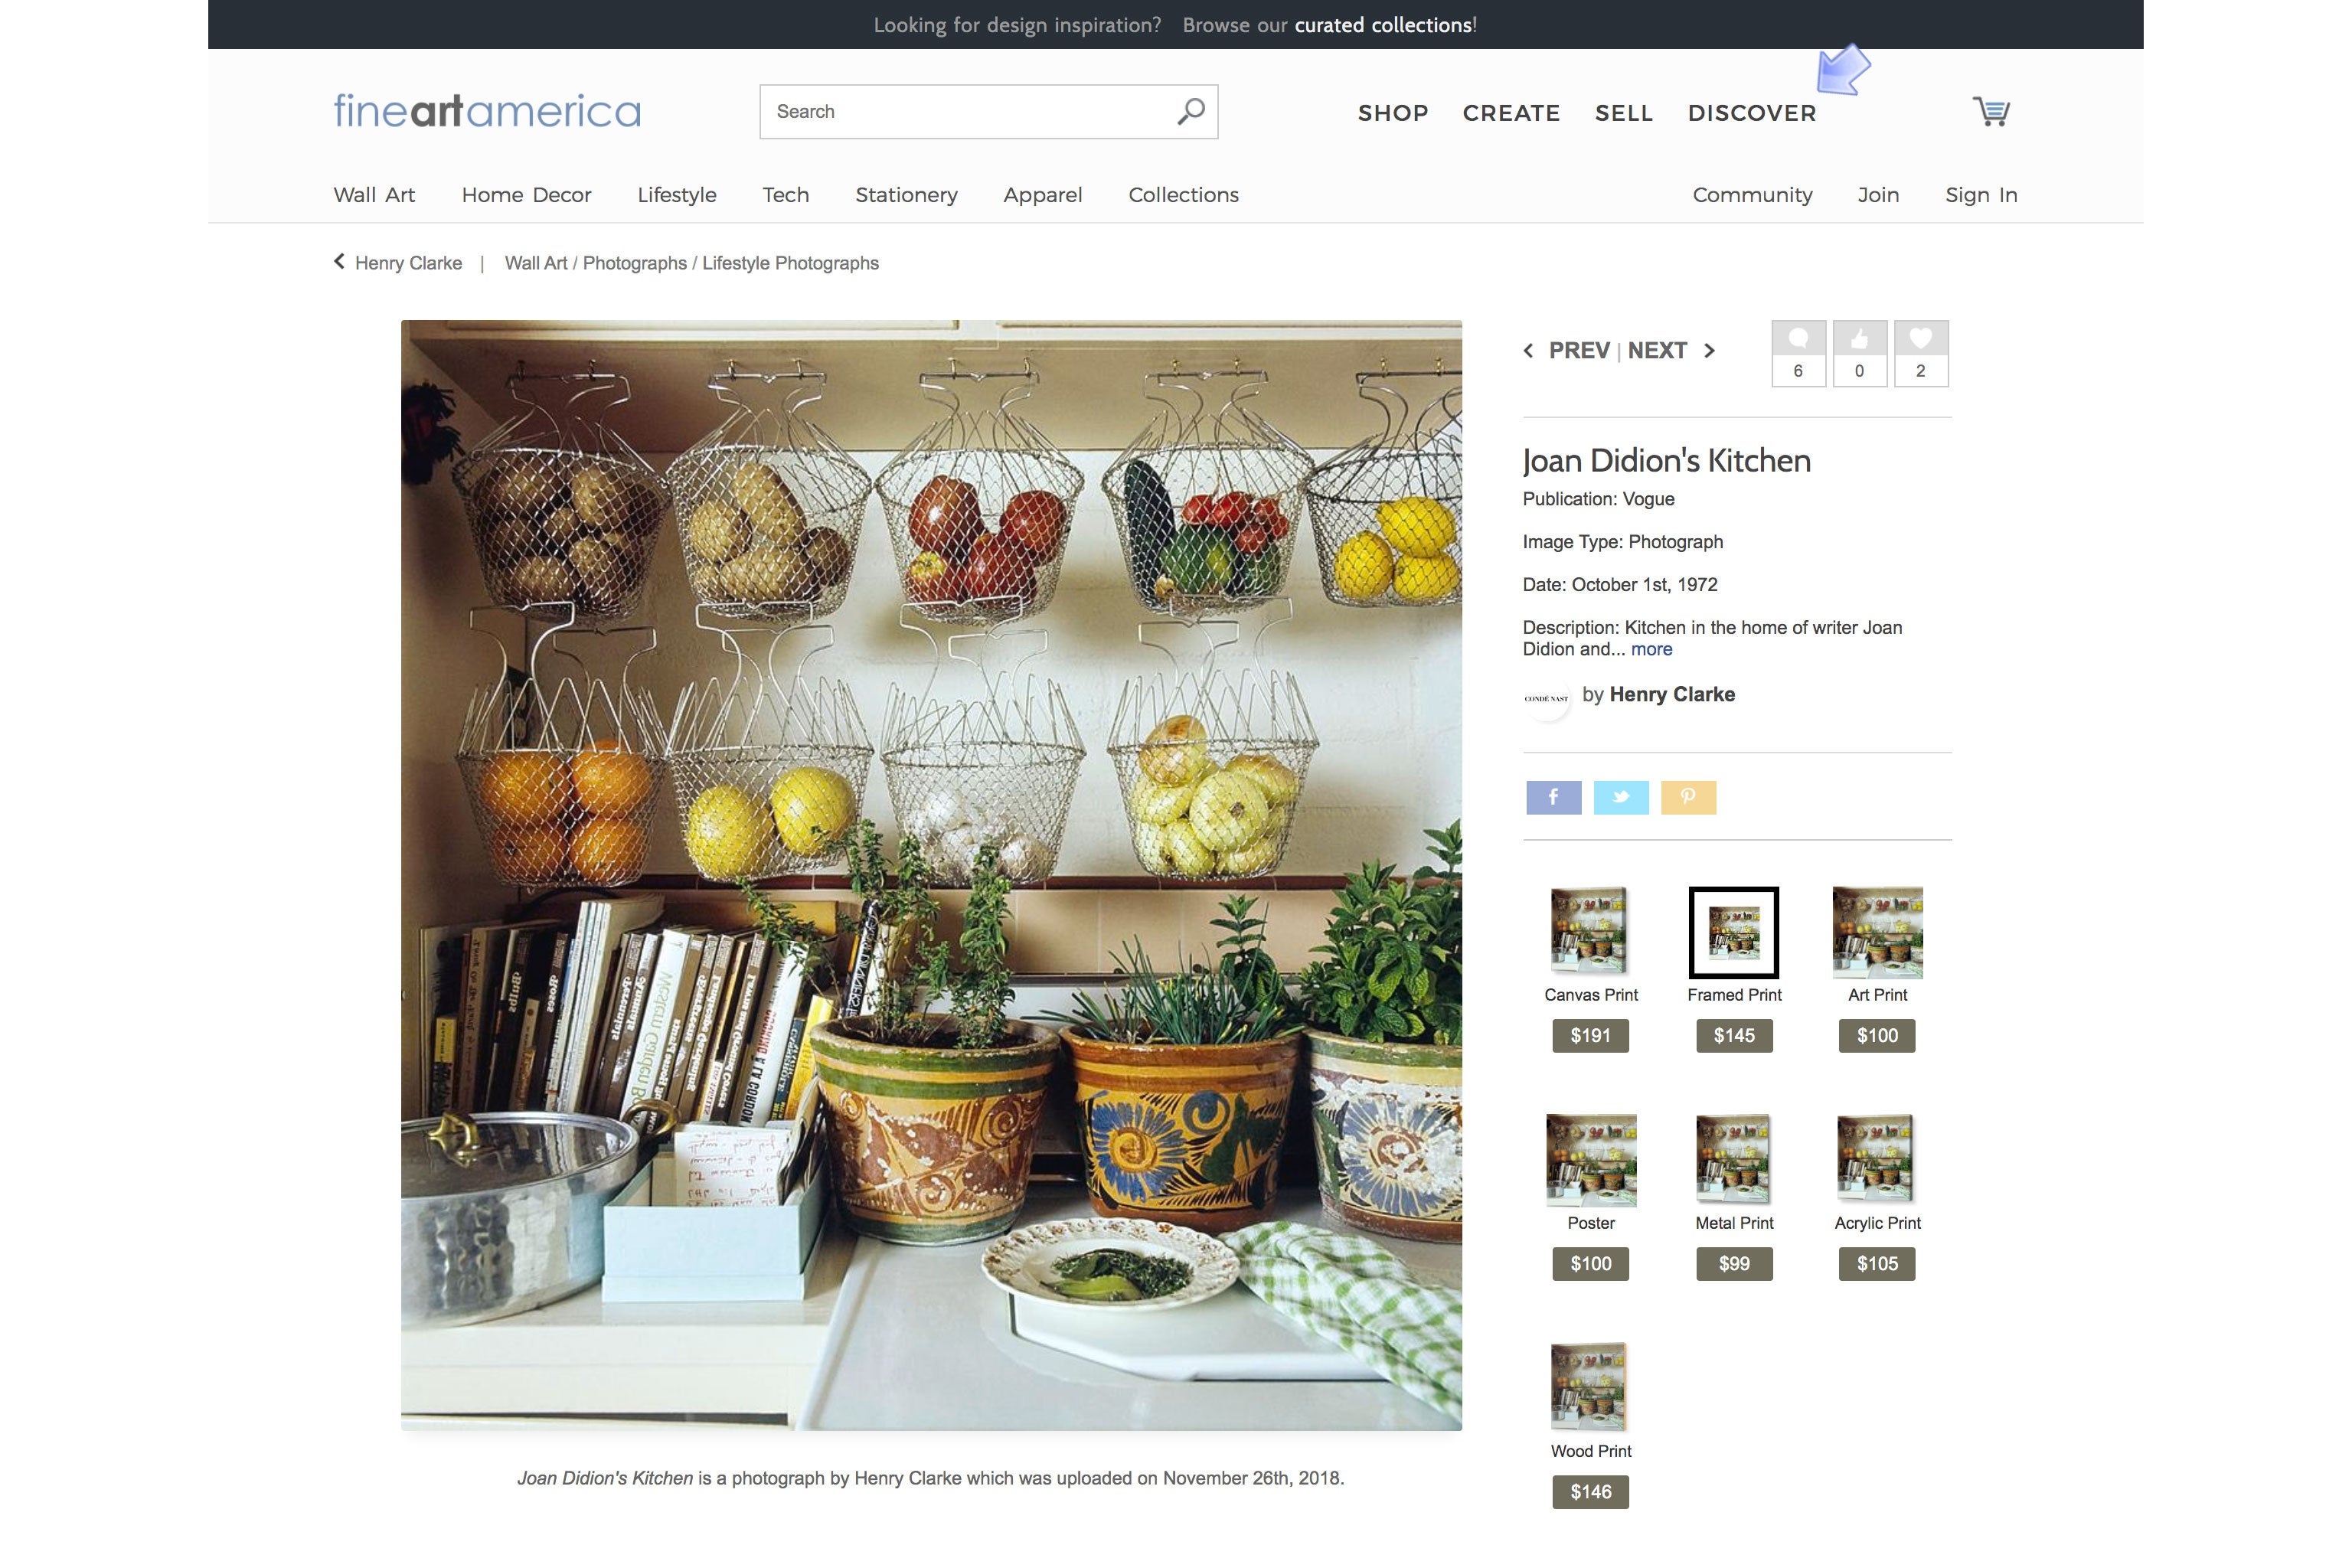 Screengrab of a website showing a photo of a kitchen counter.